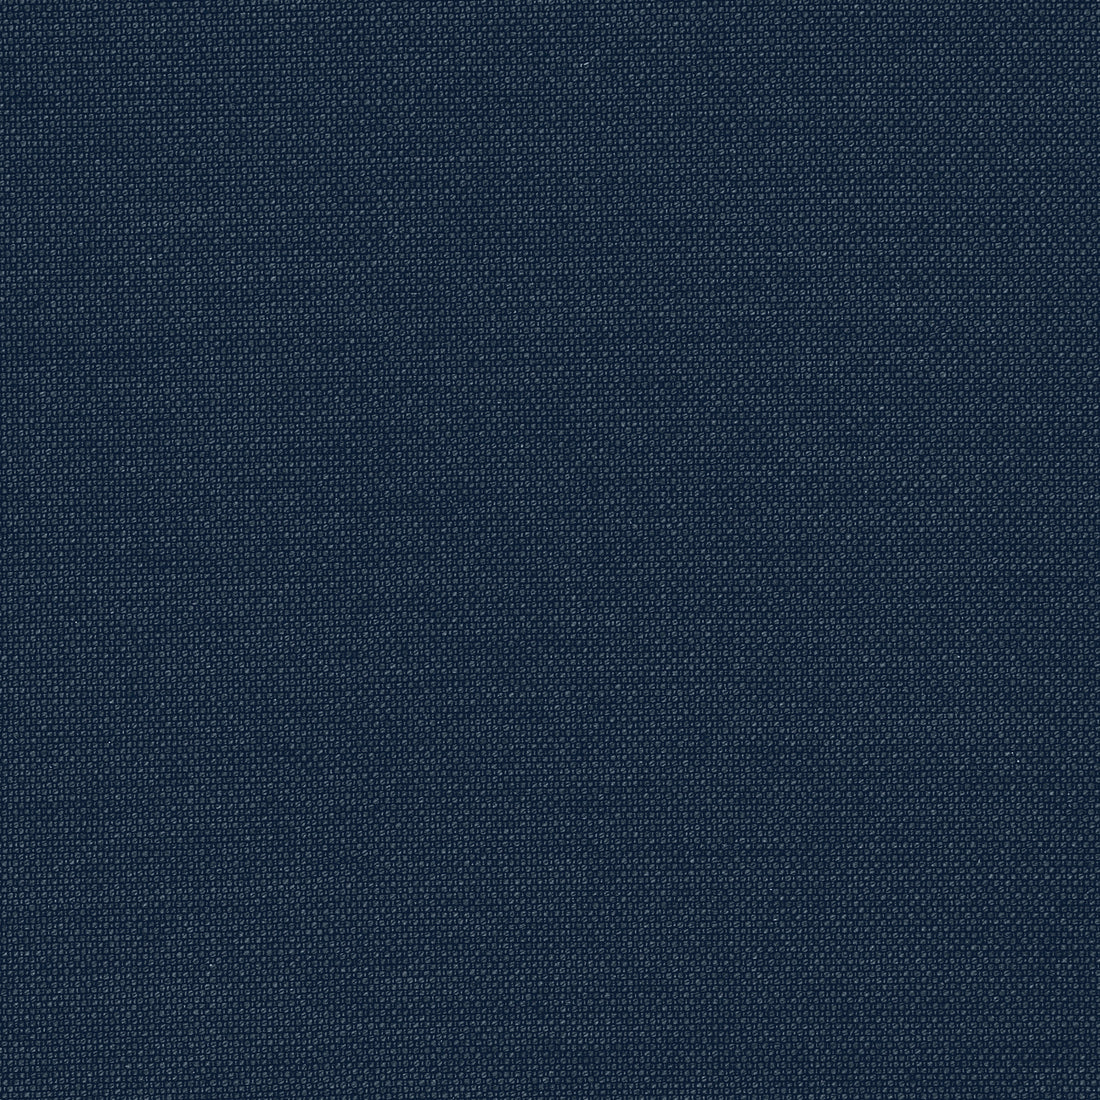 Emery fabric in navy color - pattern number W80225 - by Thibaut in the Kaleidoscope Fabrics collection